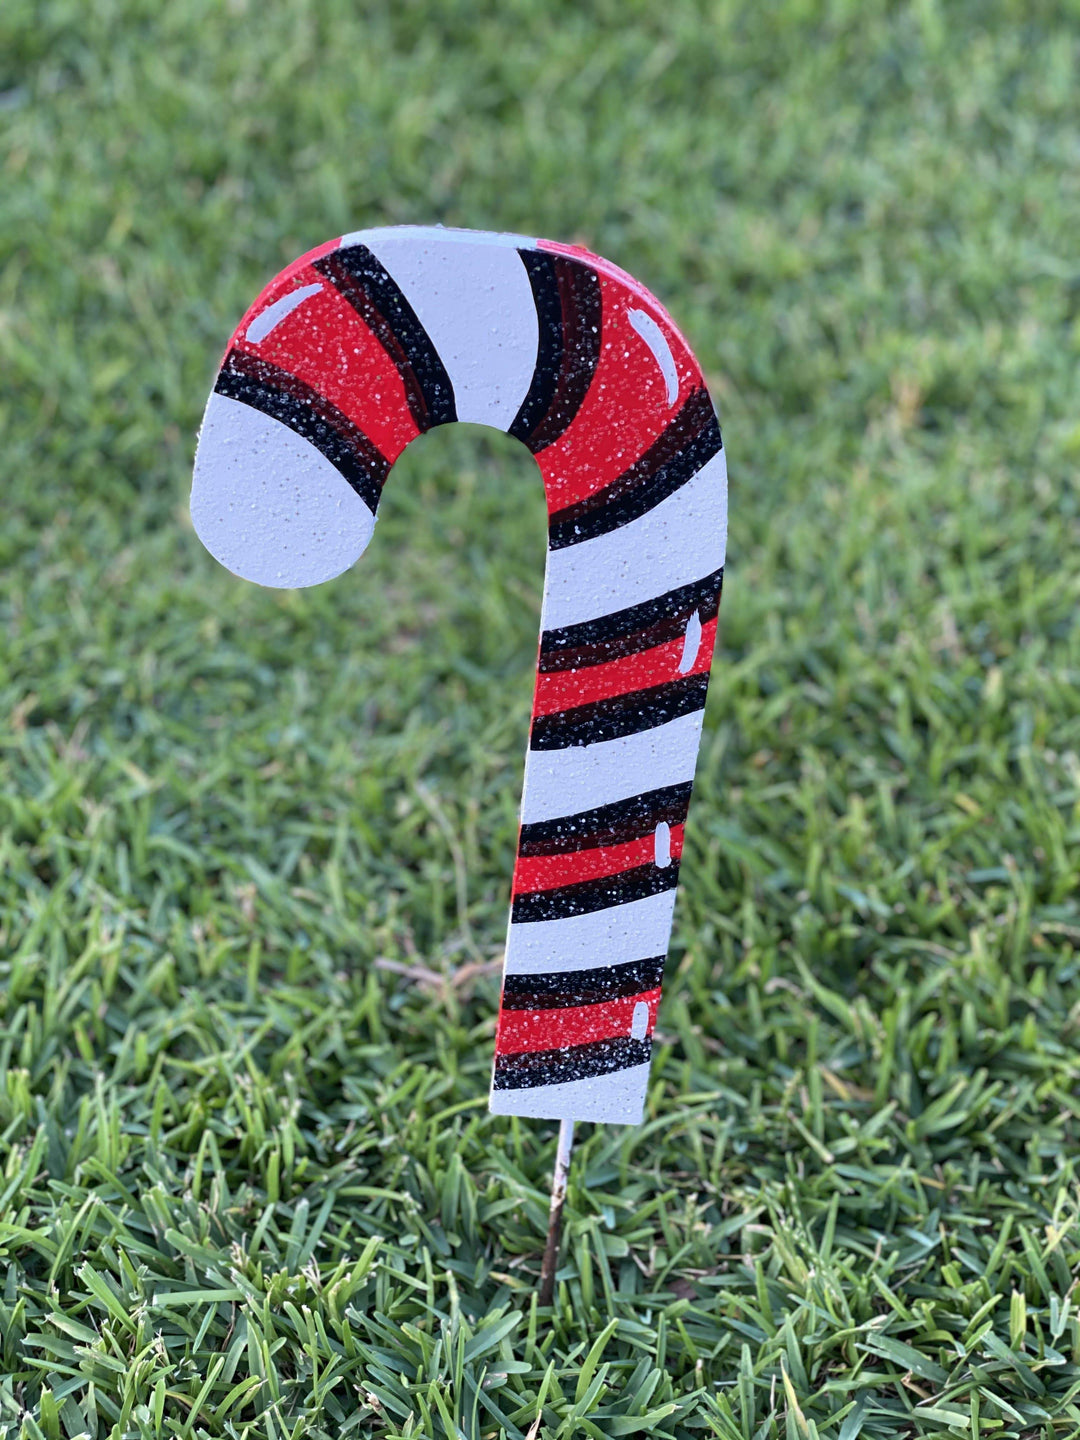 Christmas Candy cane facing left painted yard art design